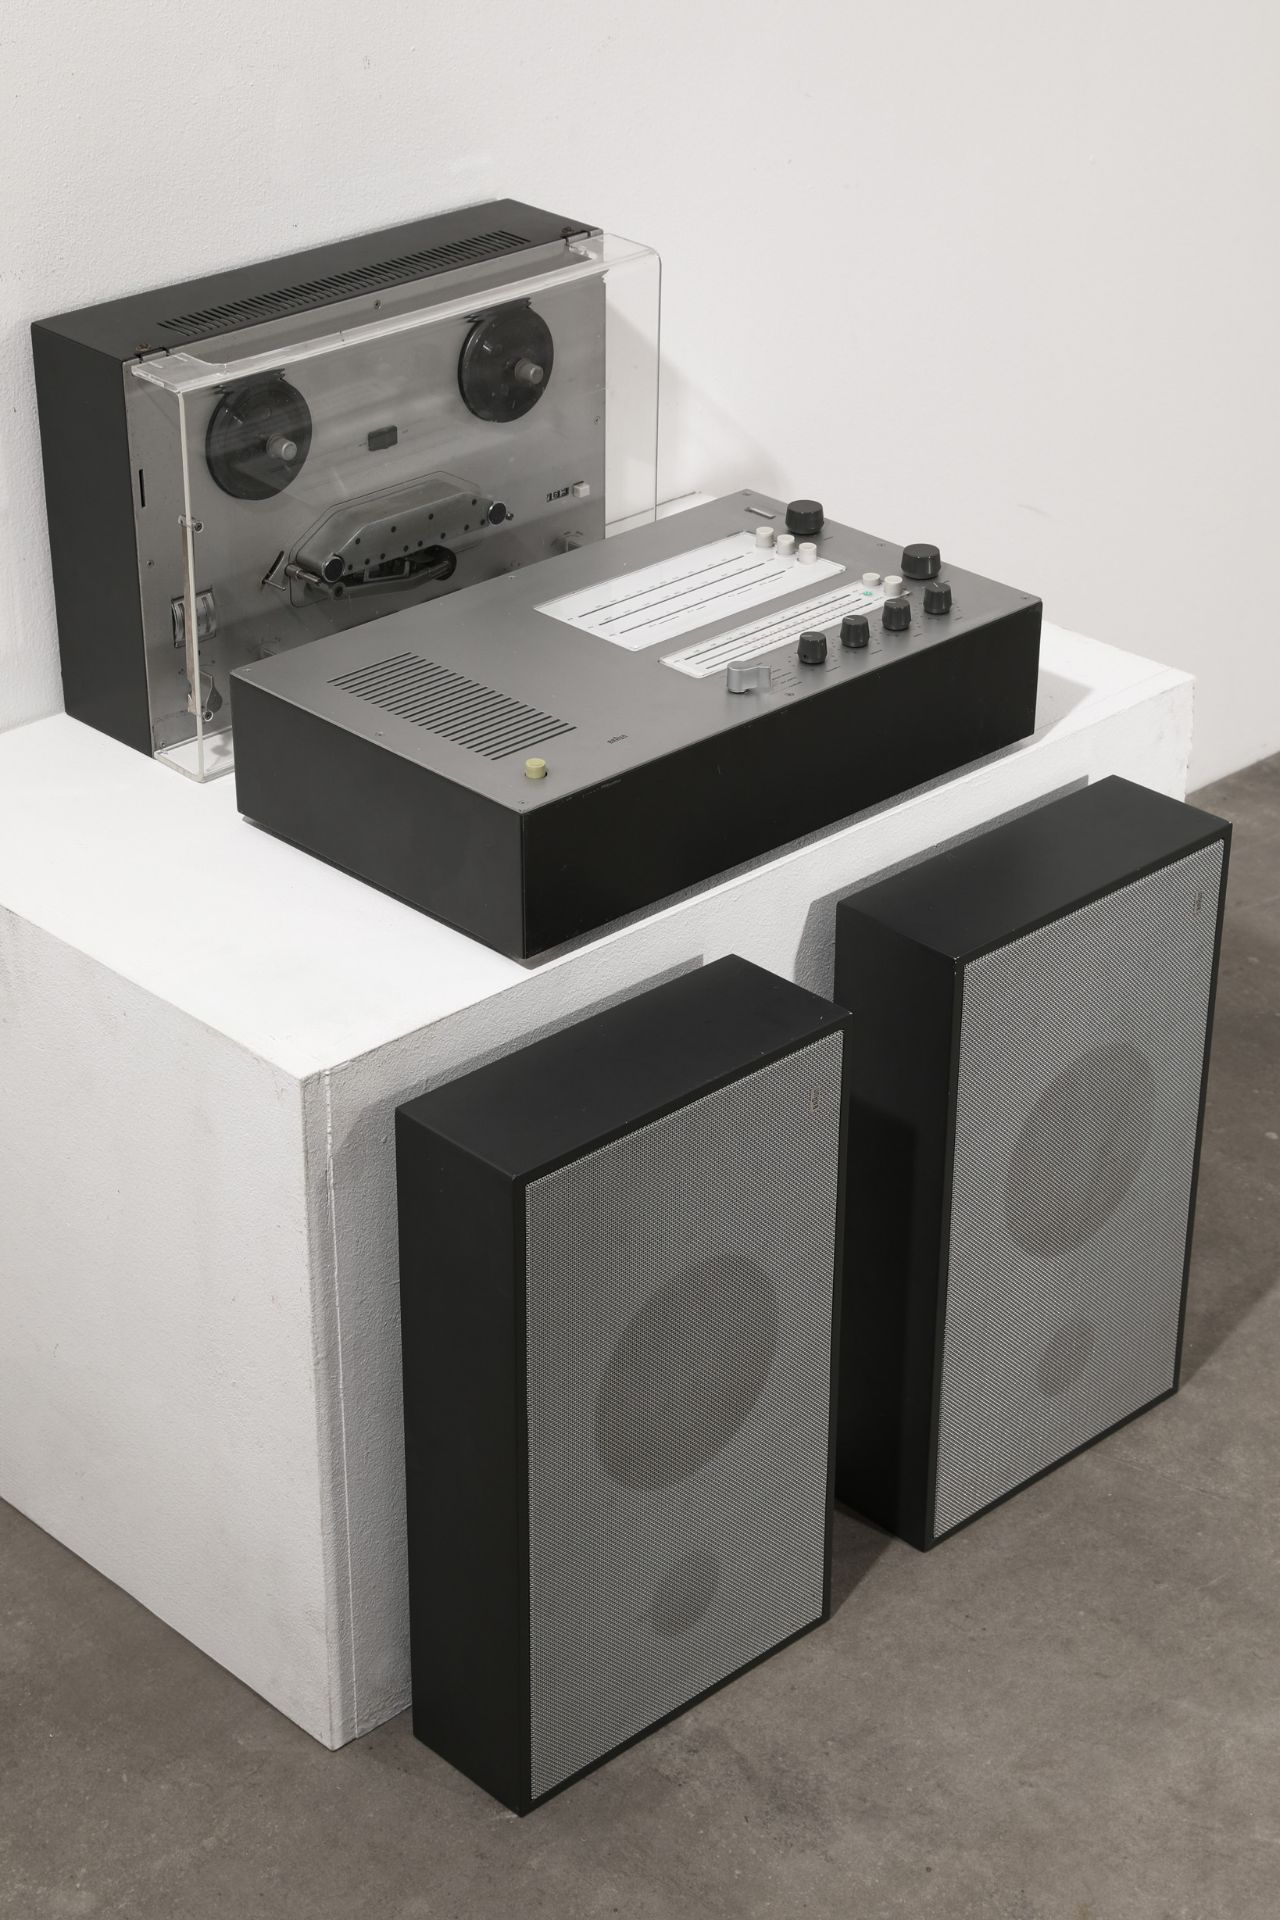 Dieter Rams, Braun AG, Wall Stereo System: TS 45/1, TG 60, L 450 - Image 2 of 7